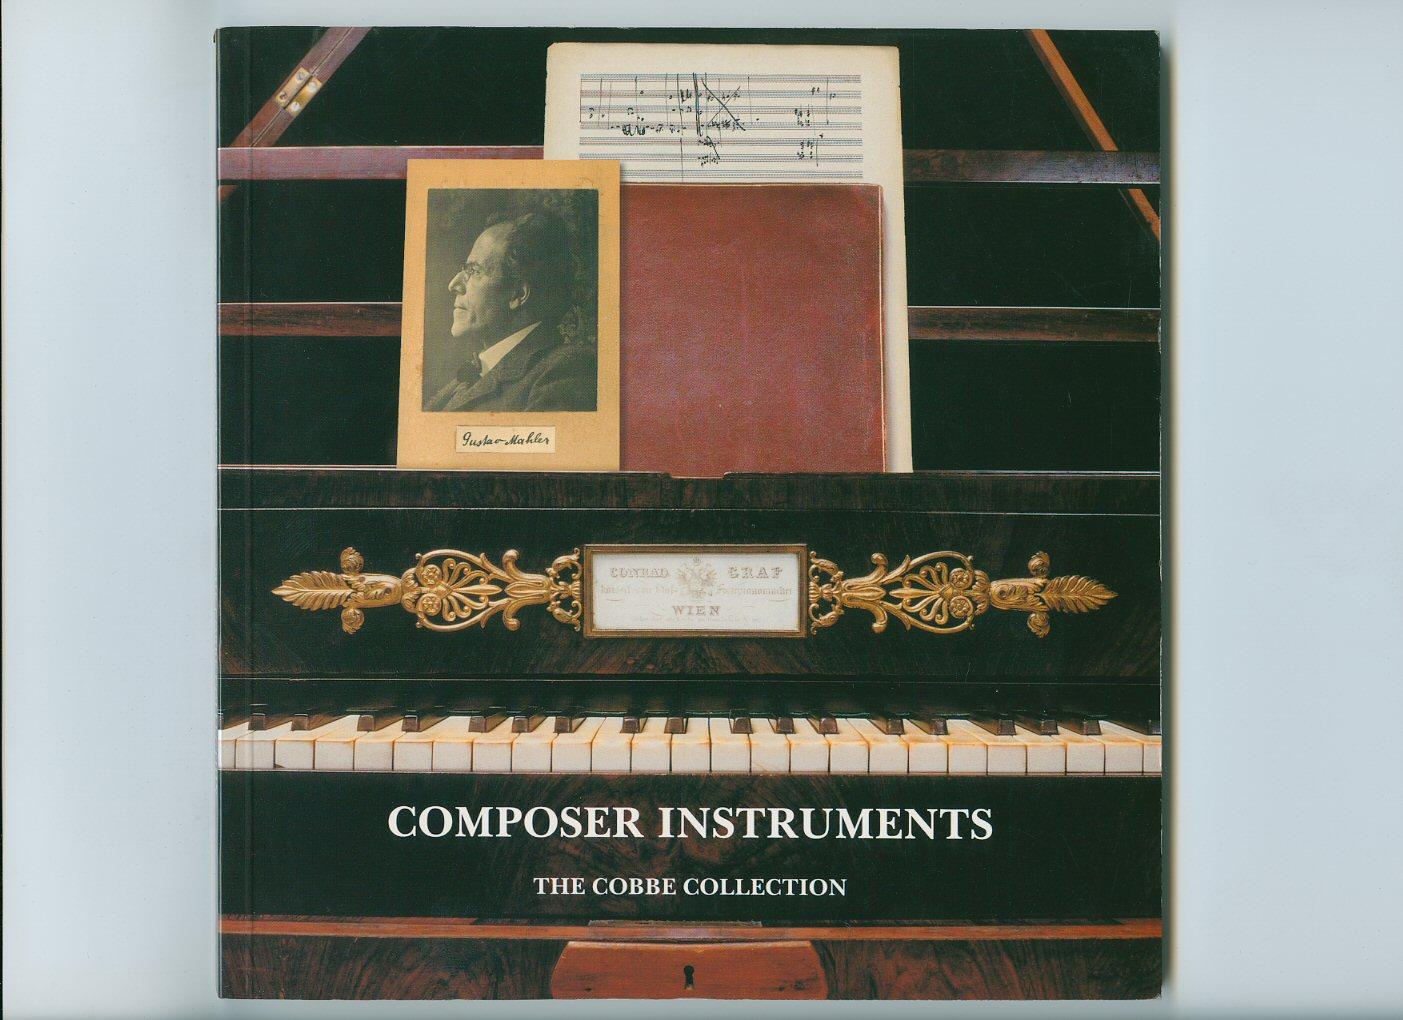 Composer Instruments: Catalogue of the Cobbe Collection of Keyboard Instruments with Composer Associations